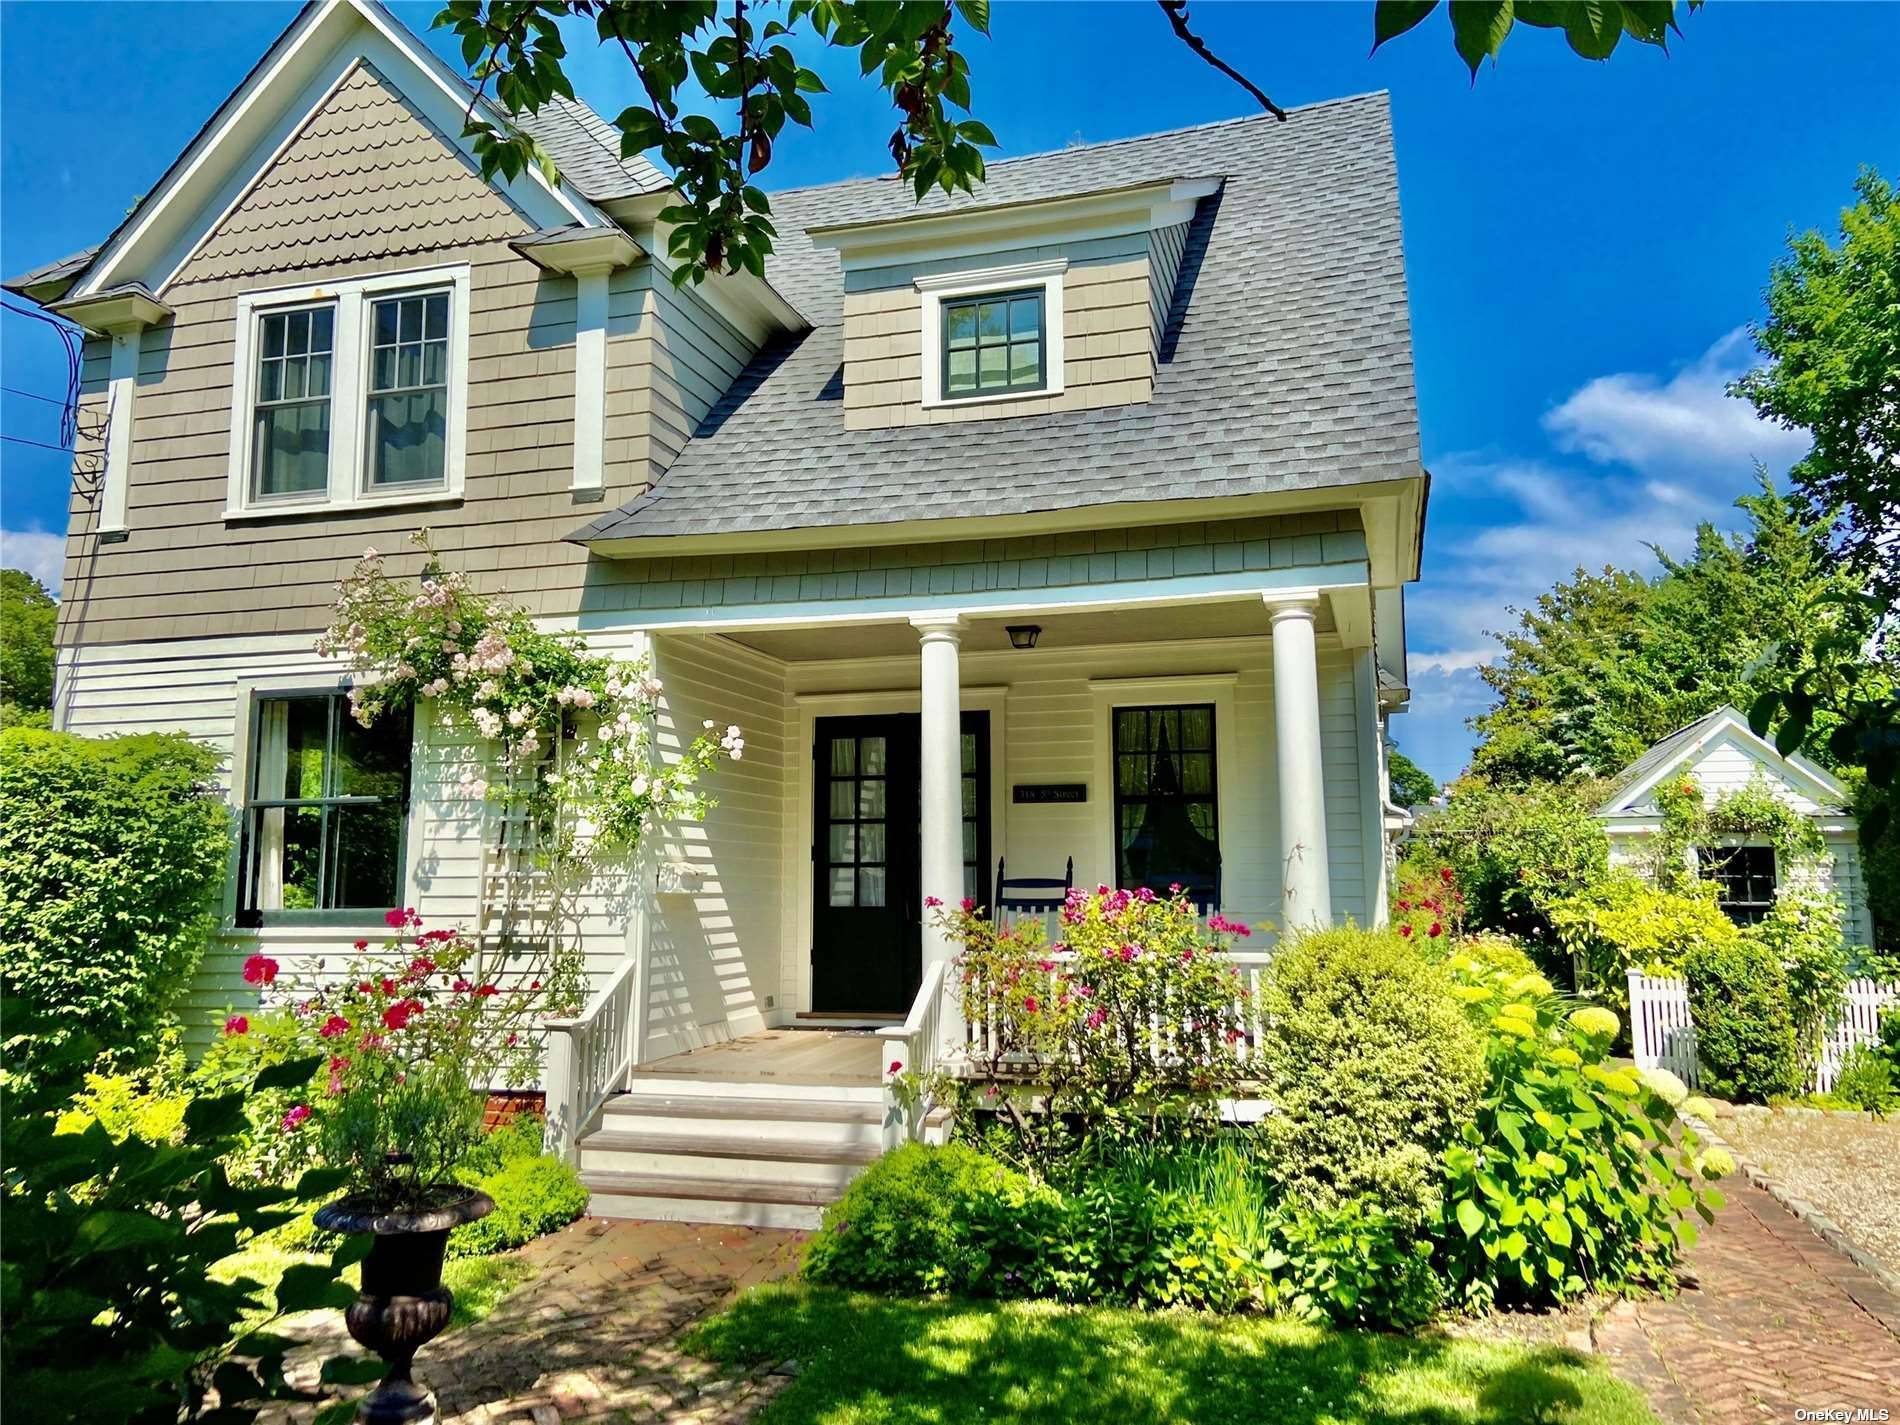 Greenport Village West Dublin architectural home is available for you to enjoy !